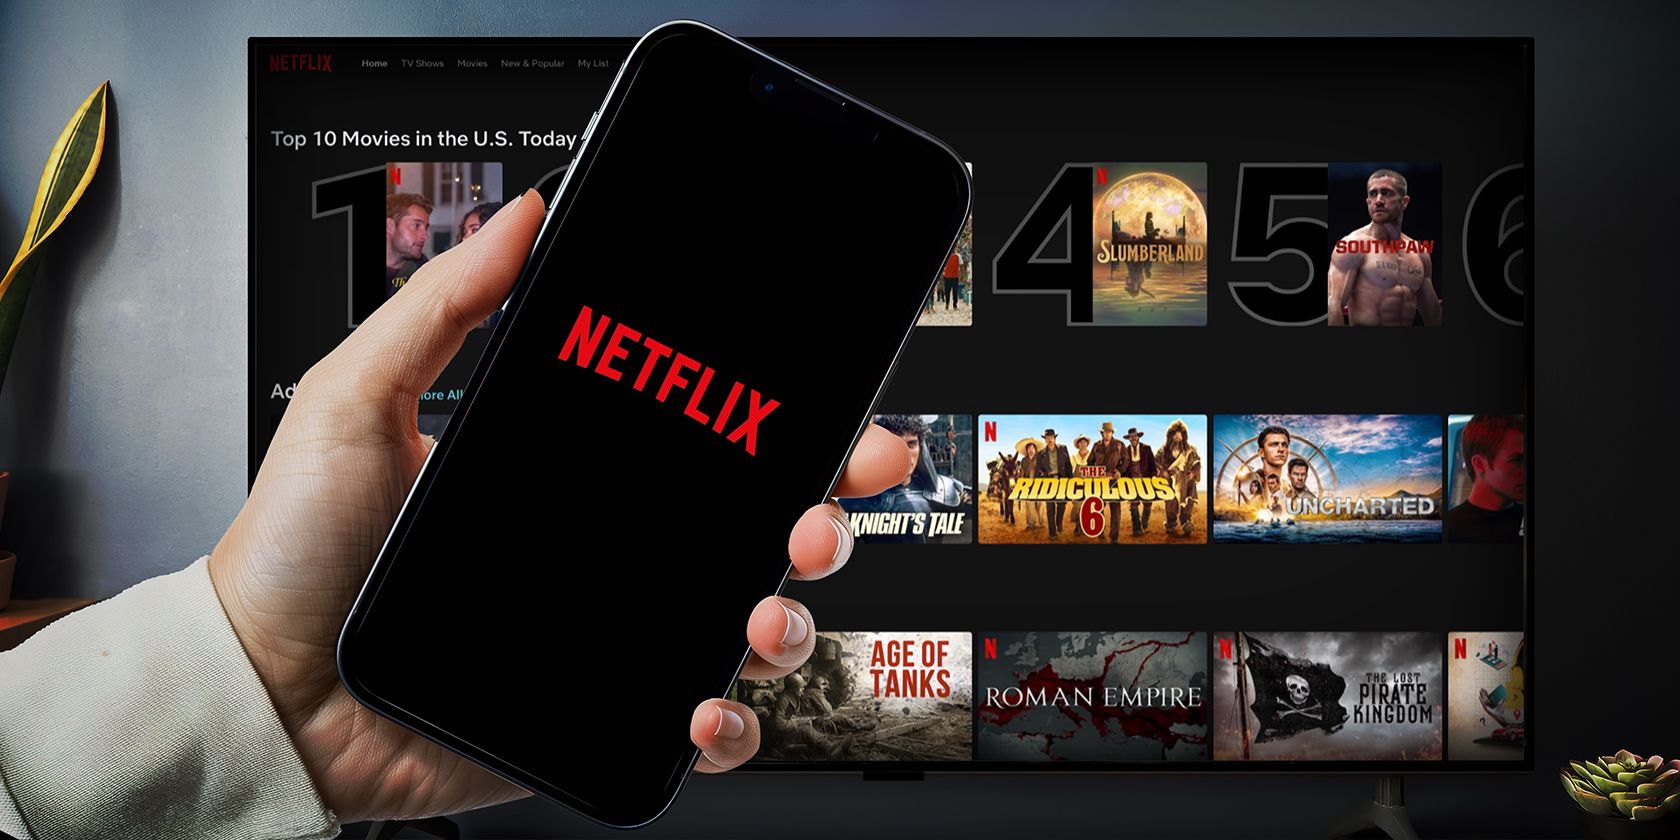 A hand holding an iphone with the Netflix logo on the screen in front of a TV displaying the Netflix interface and top movies.